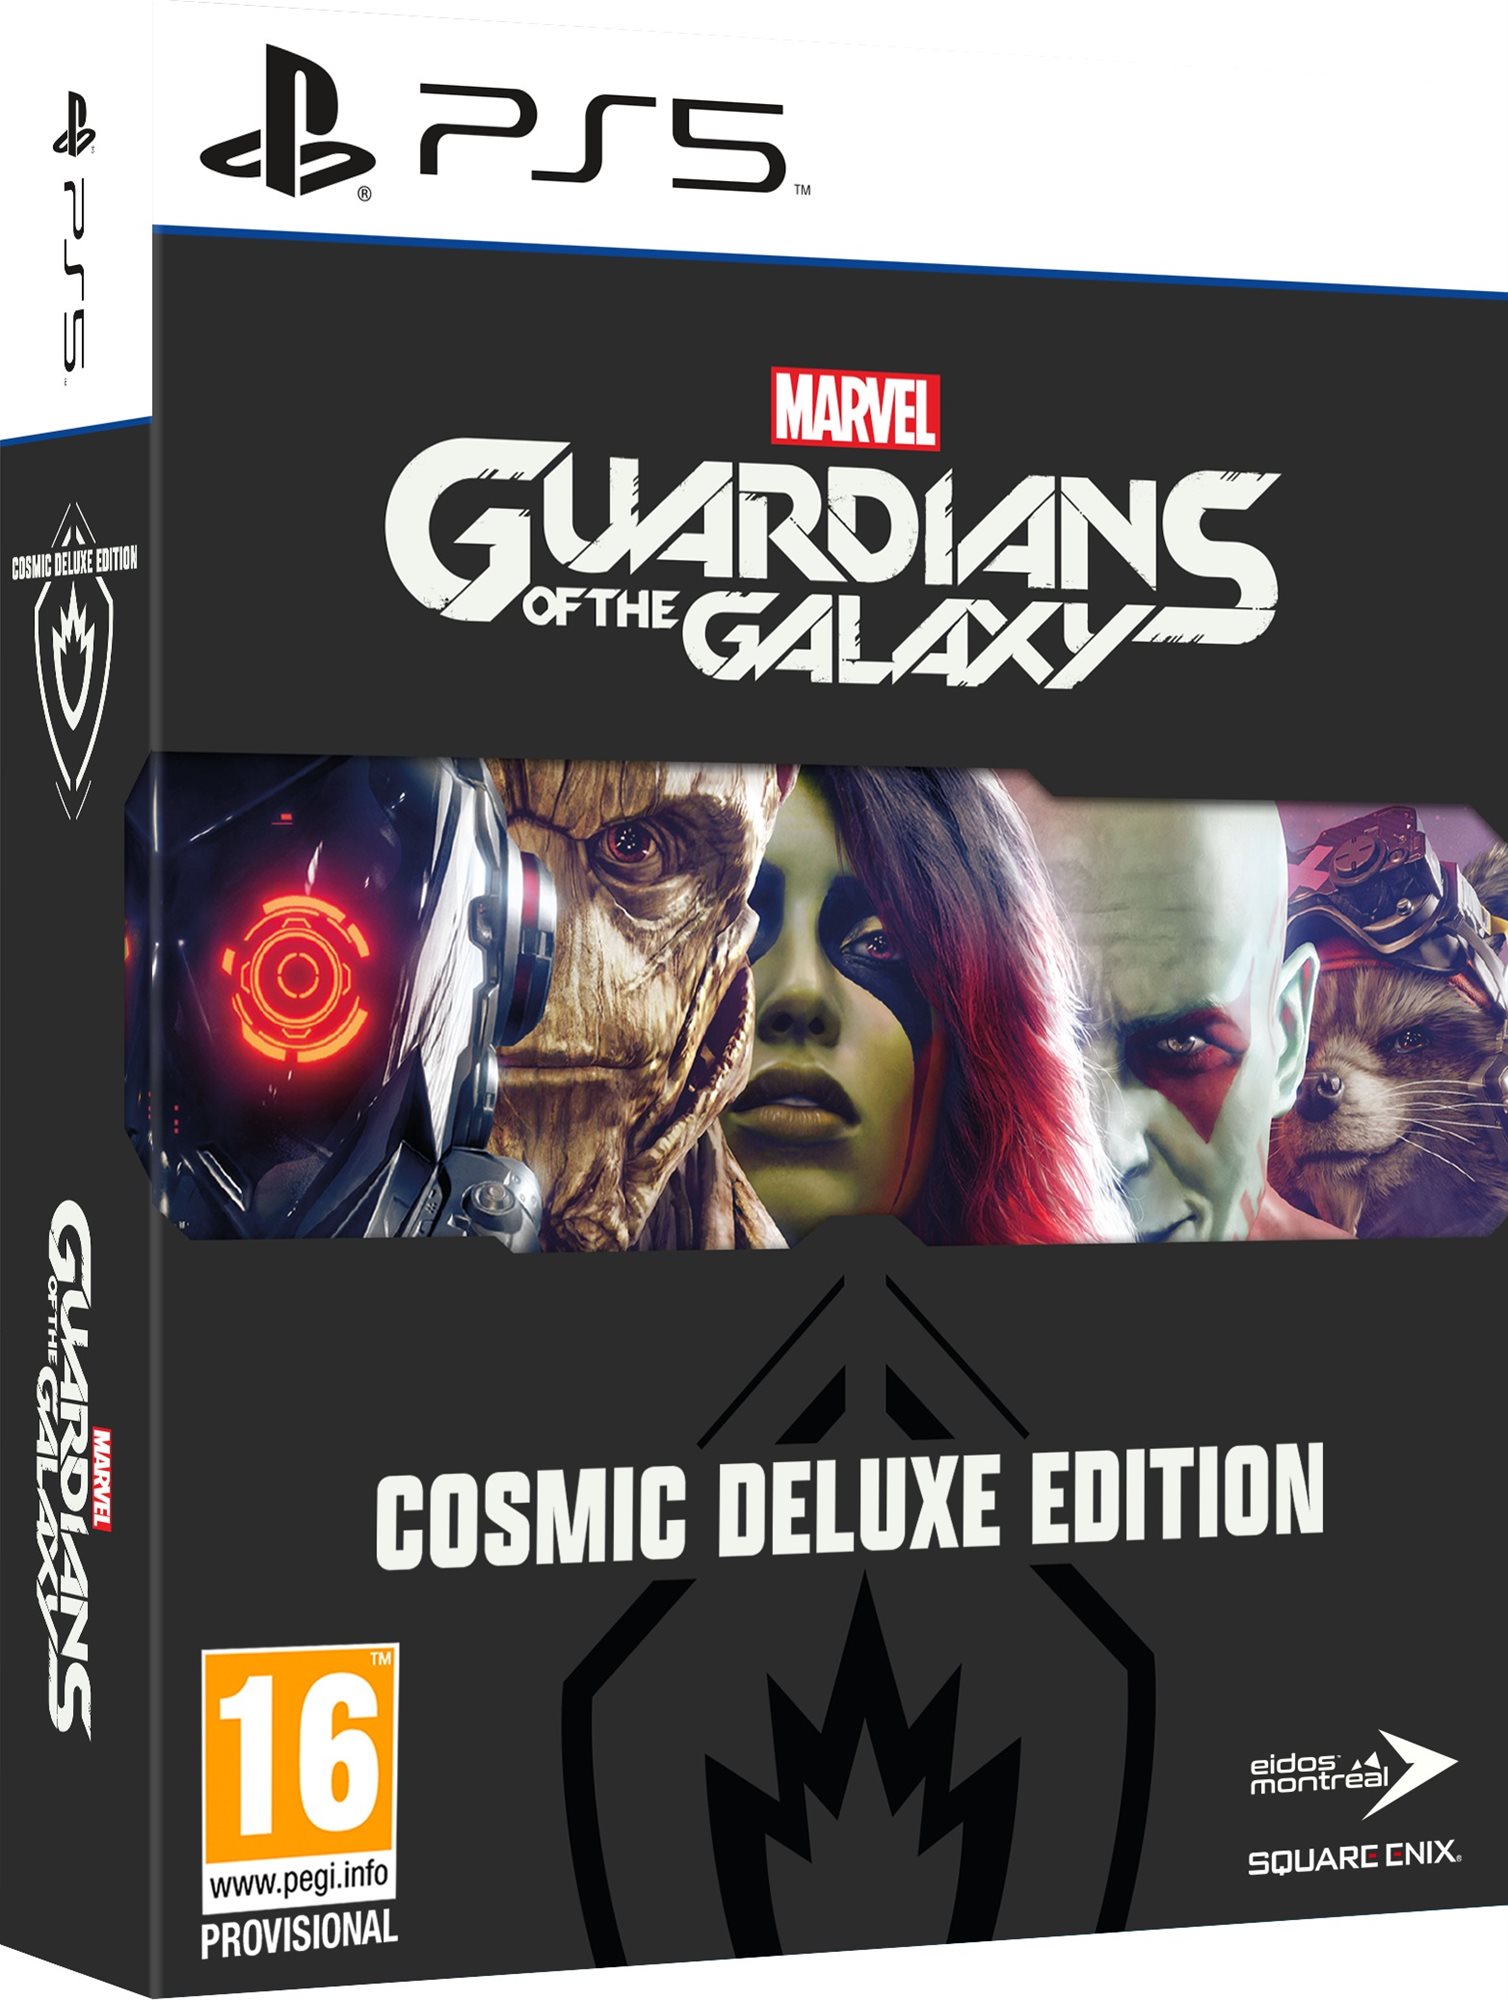 Marvels Guardians of the Galaxy - Cosmic Deluxe Edition - PS5